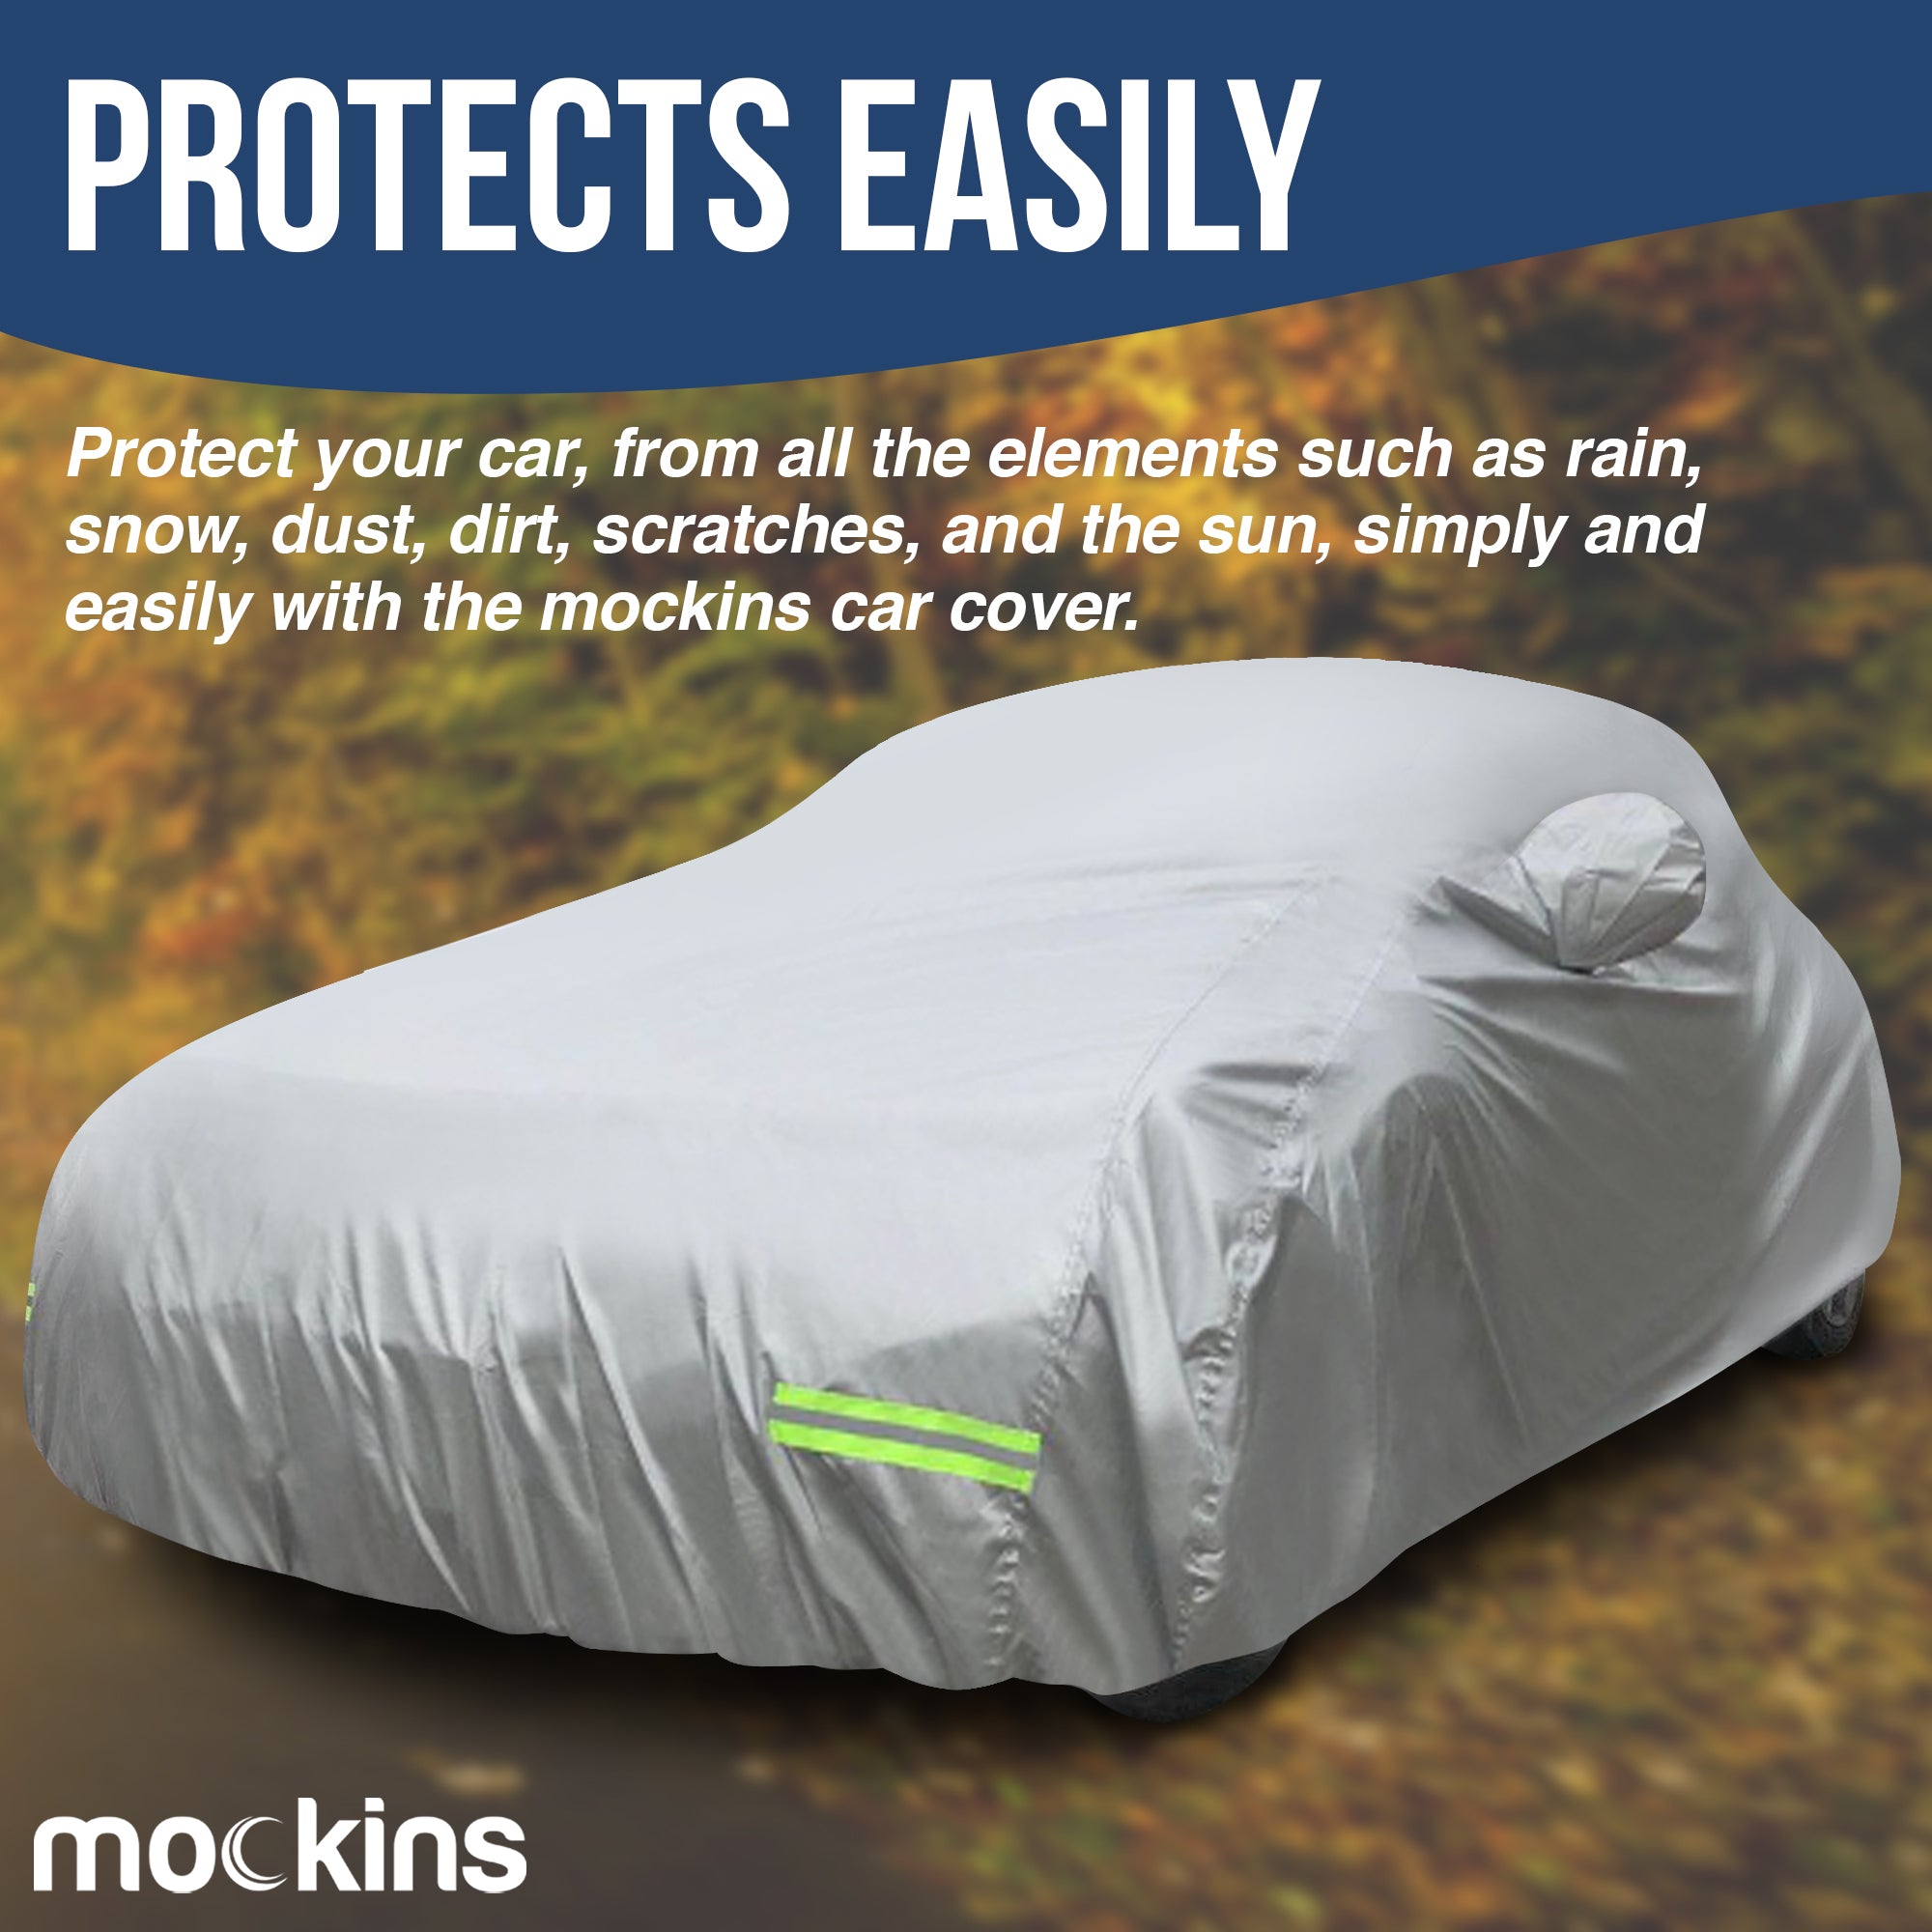 Mockins 190''x75''x72'' Heavy Duty Car Cover Waterproof All Weather |Extra  Thick SUV Car Cover for Sun, Winter, Hail Protector |250g PVC Cotton Lined